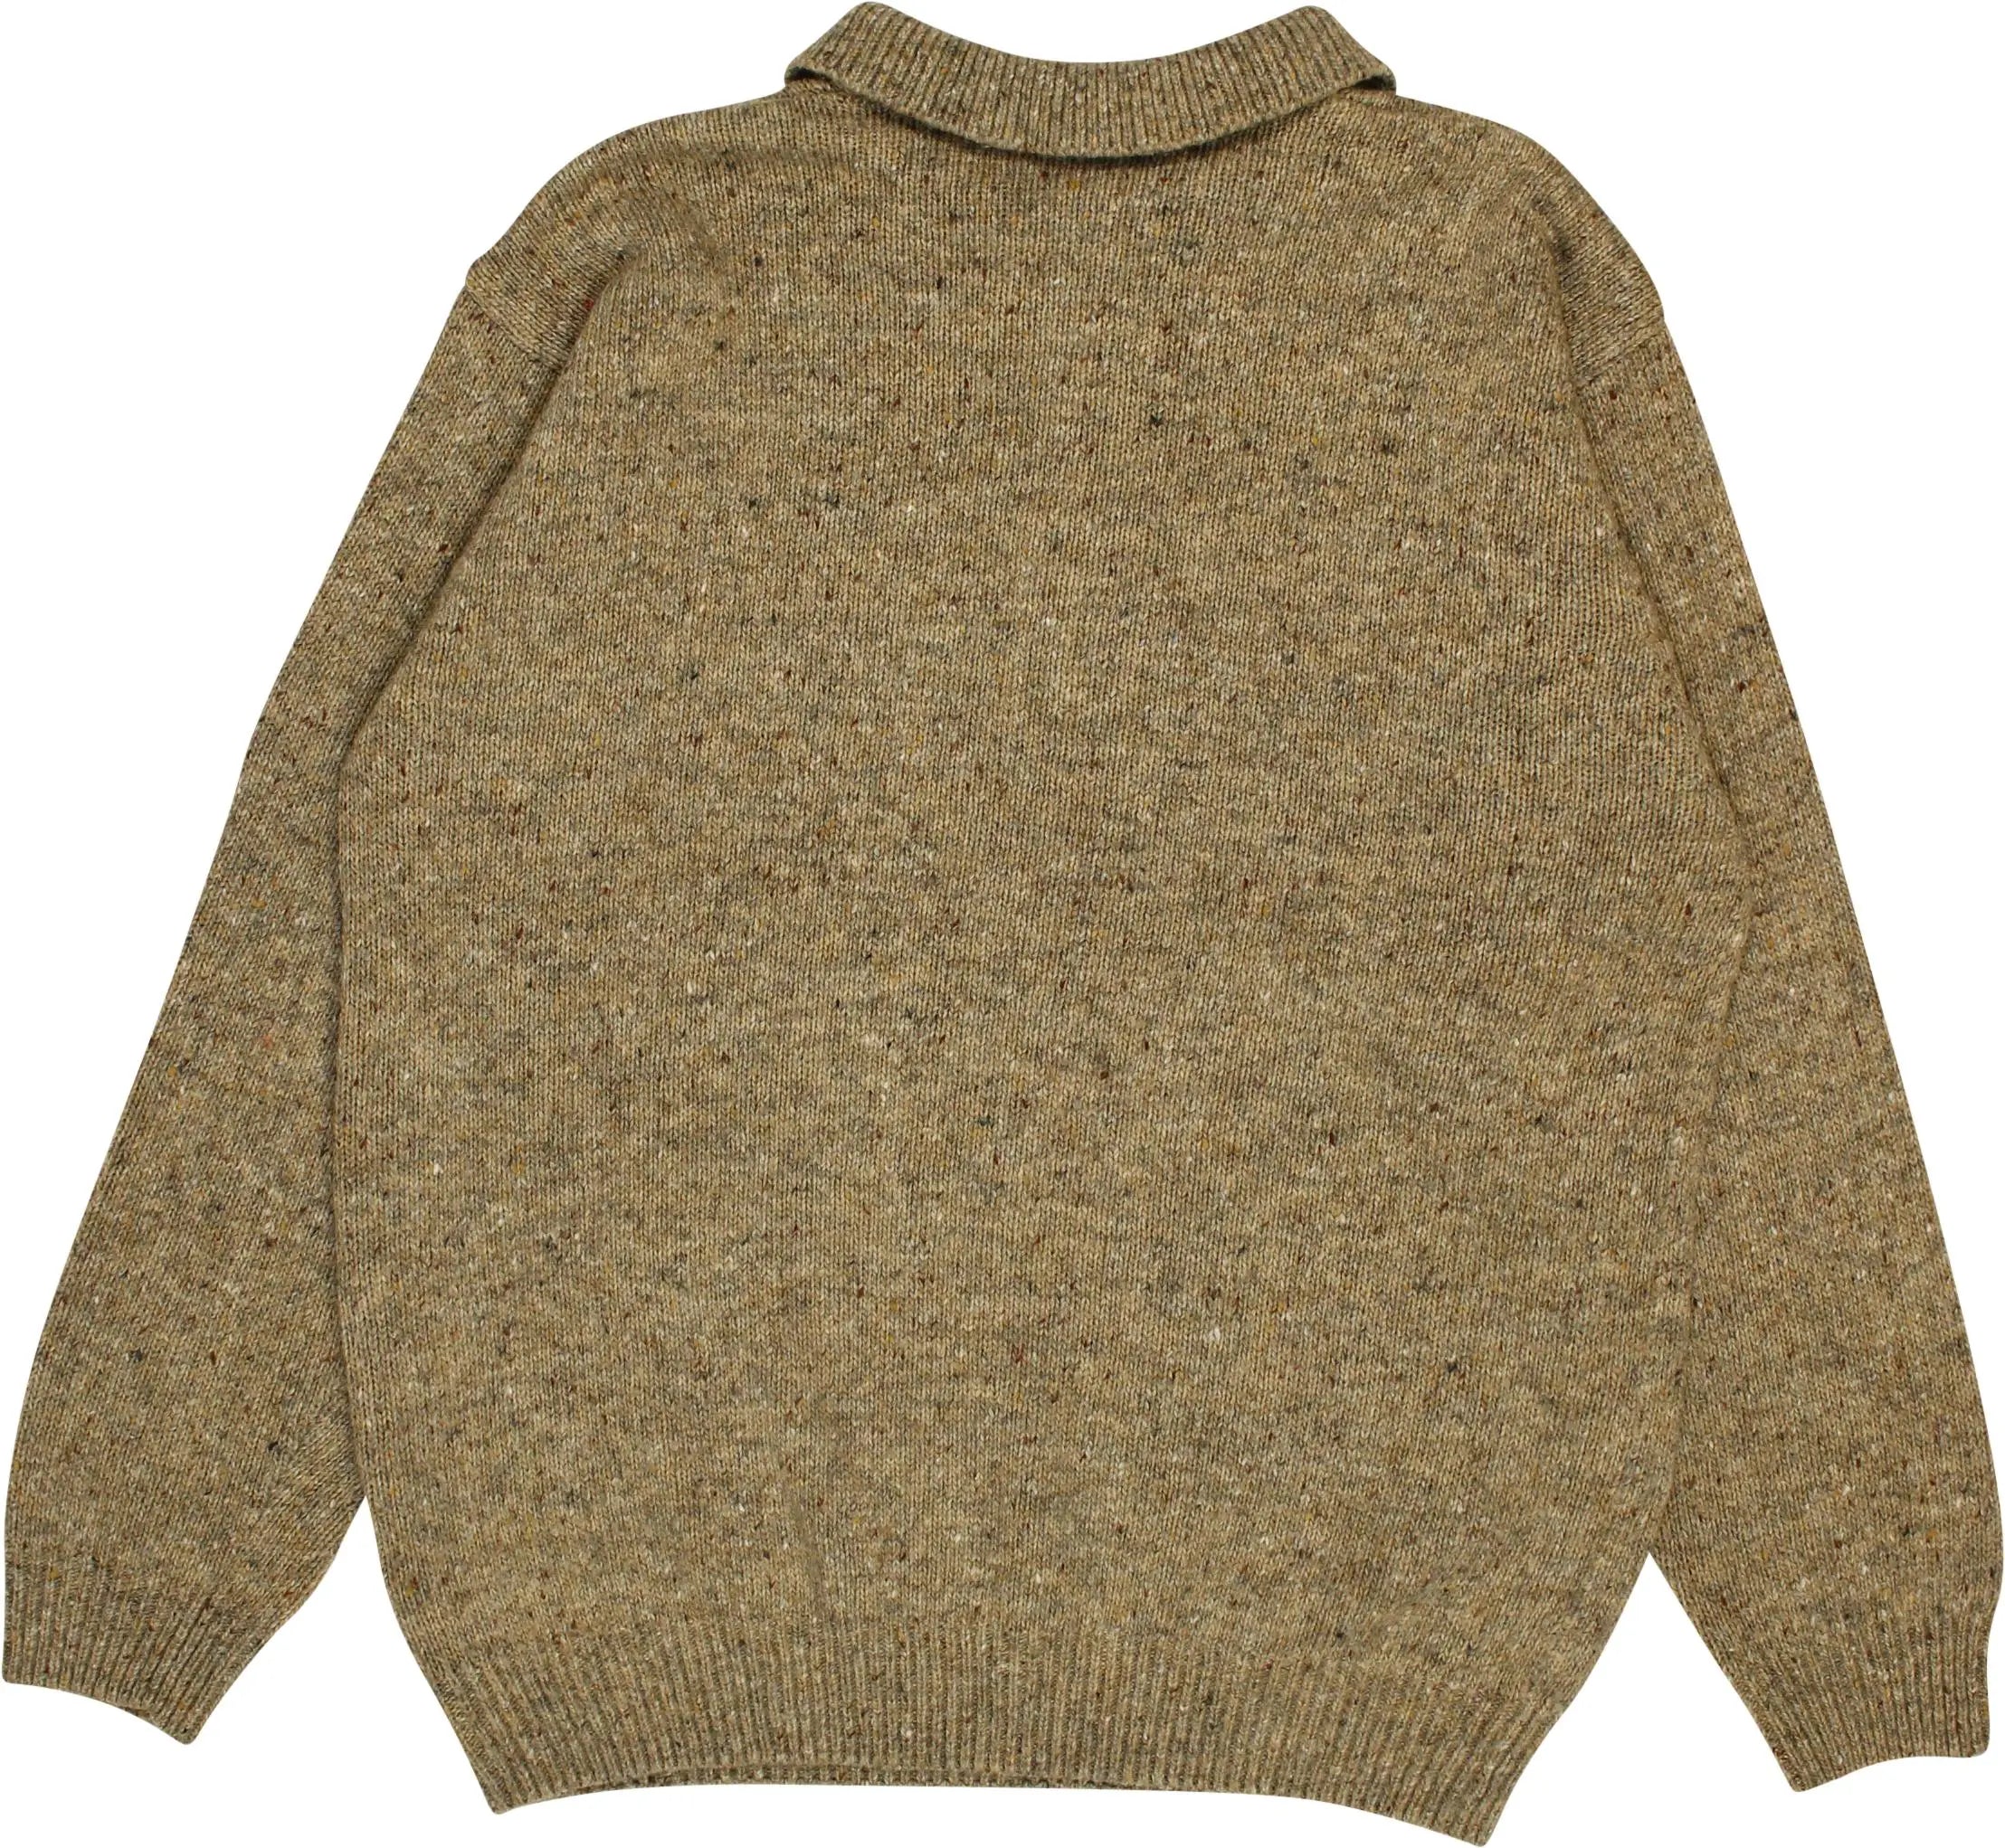 Unknown - Brown Knitted Jumper- ThriftTale.com - Vintage and second handclothing